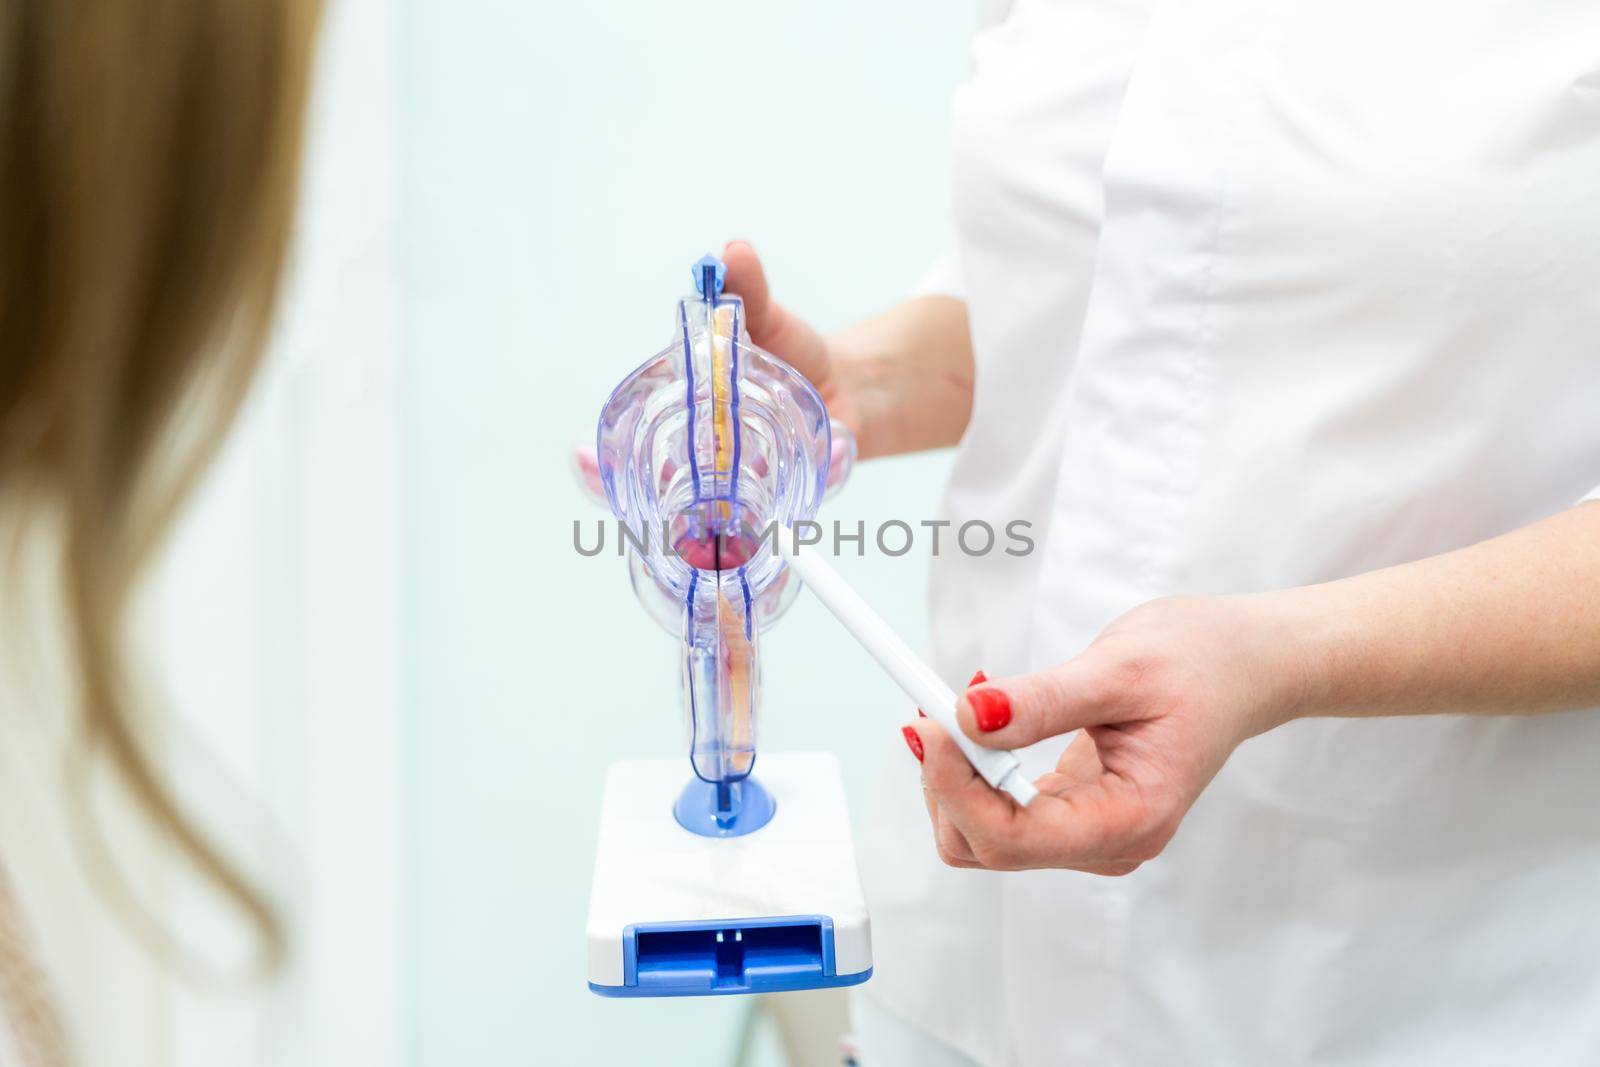 Gynecologist doctor consulting patient using uterus anatomy model